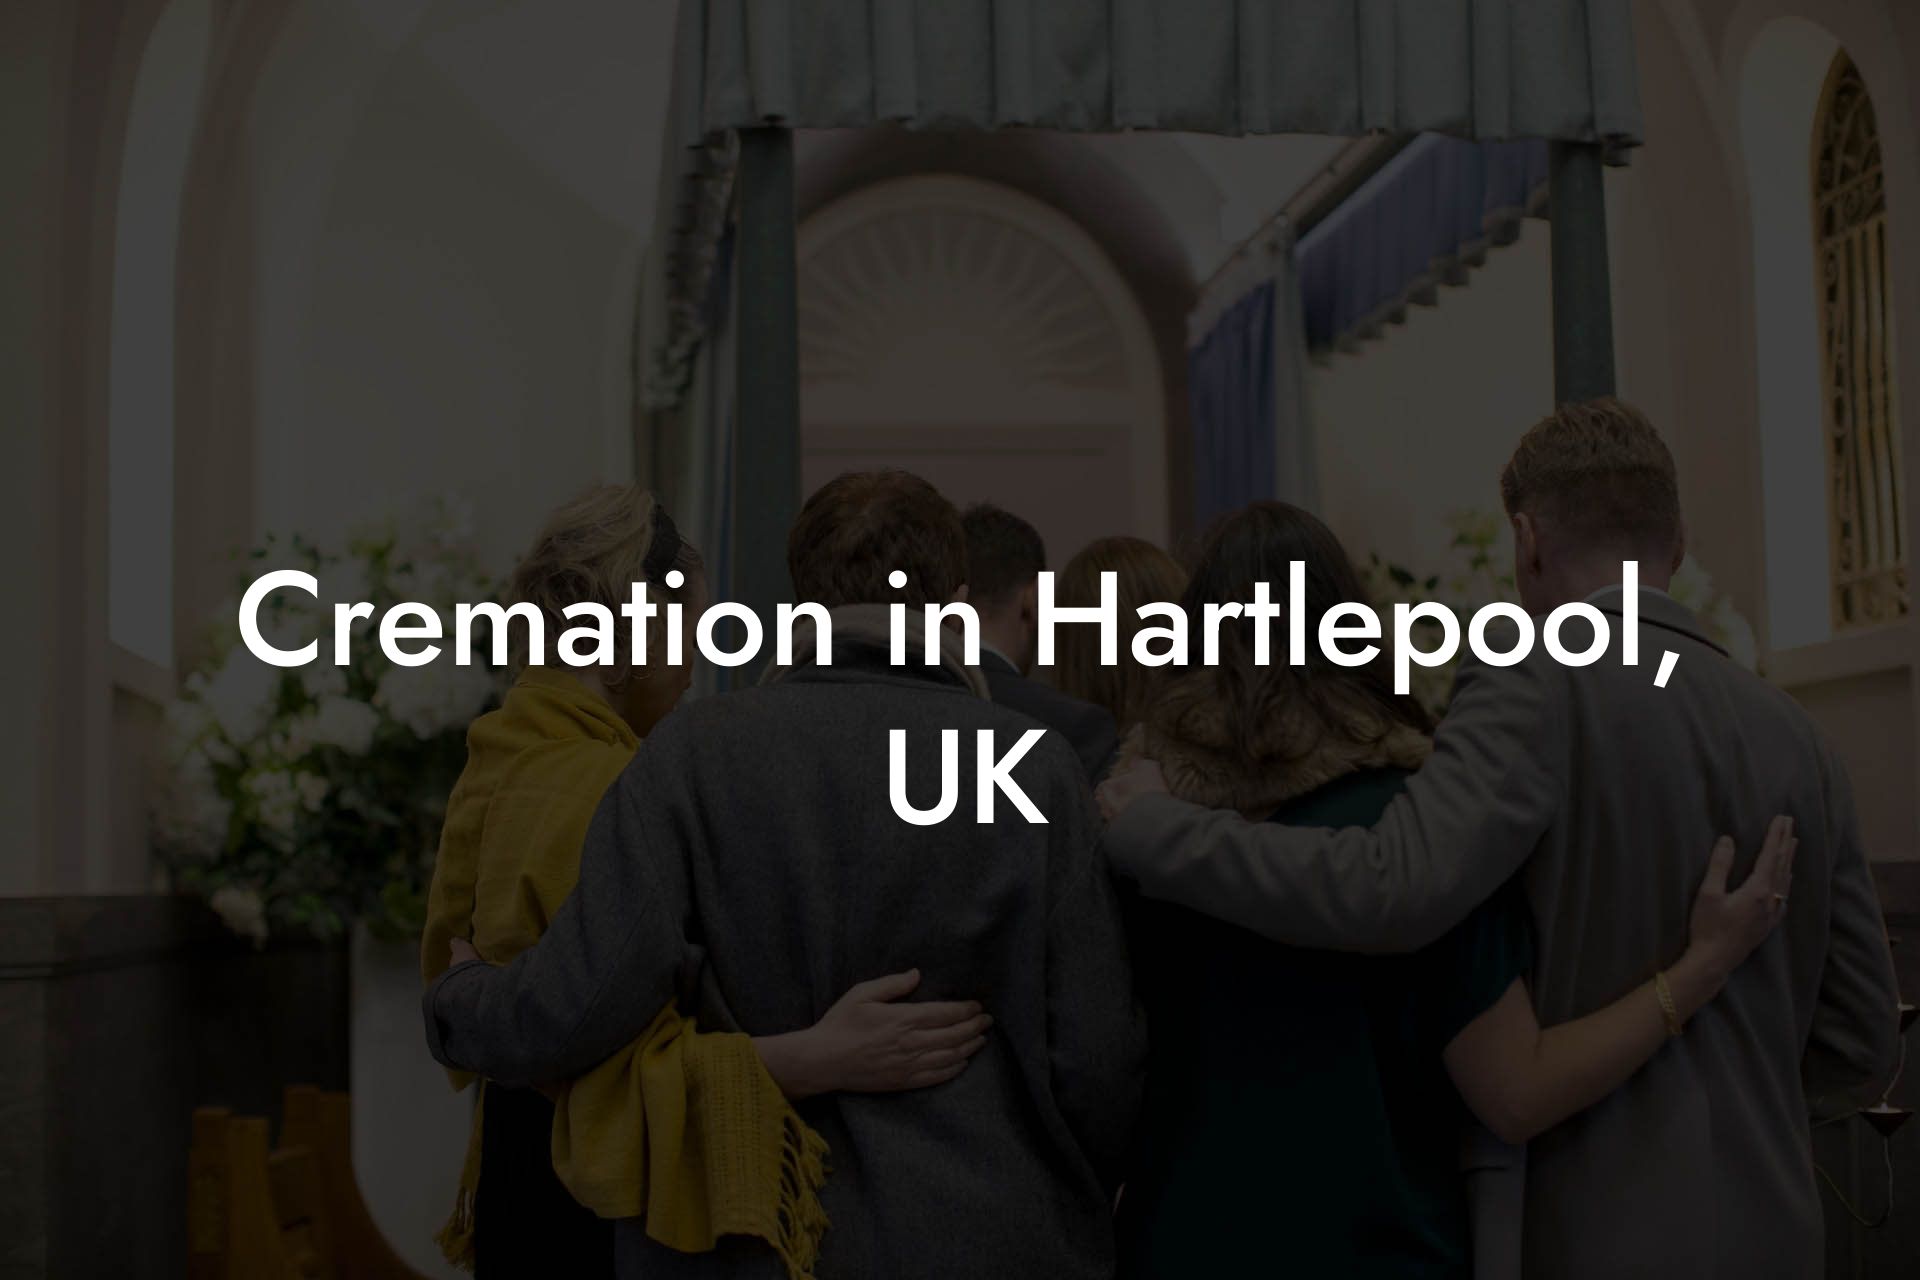 Cremation in Hartlepool, UK